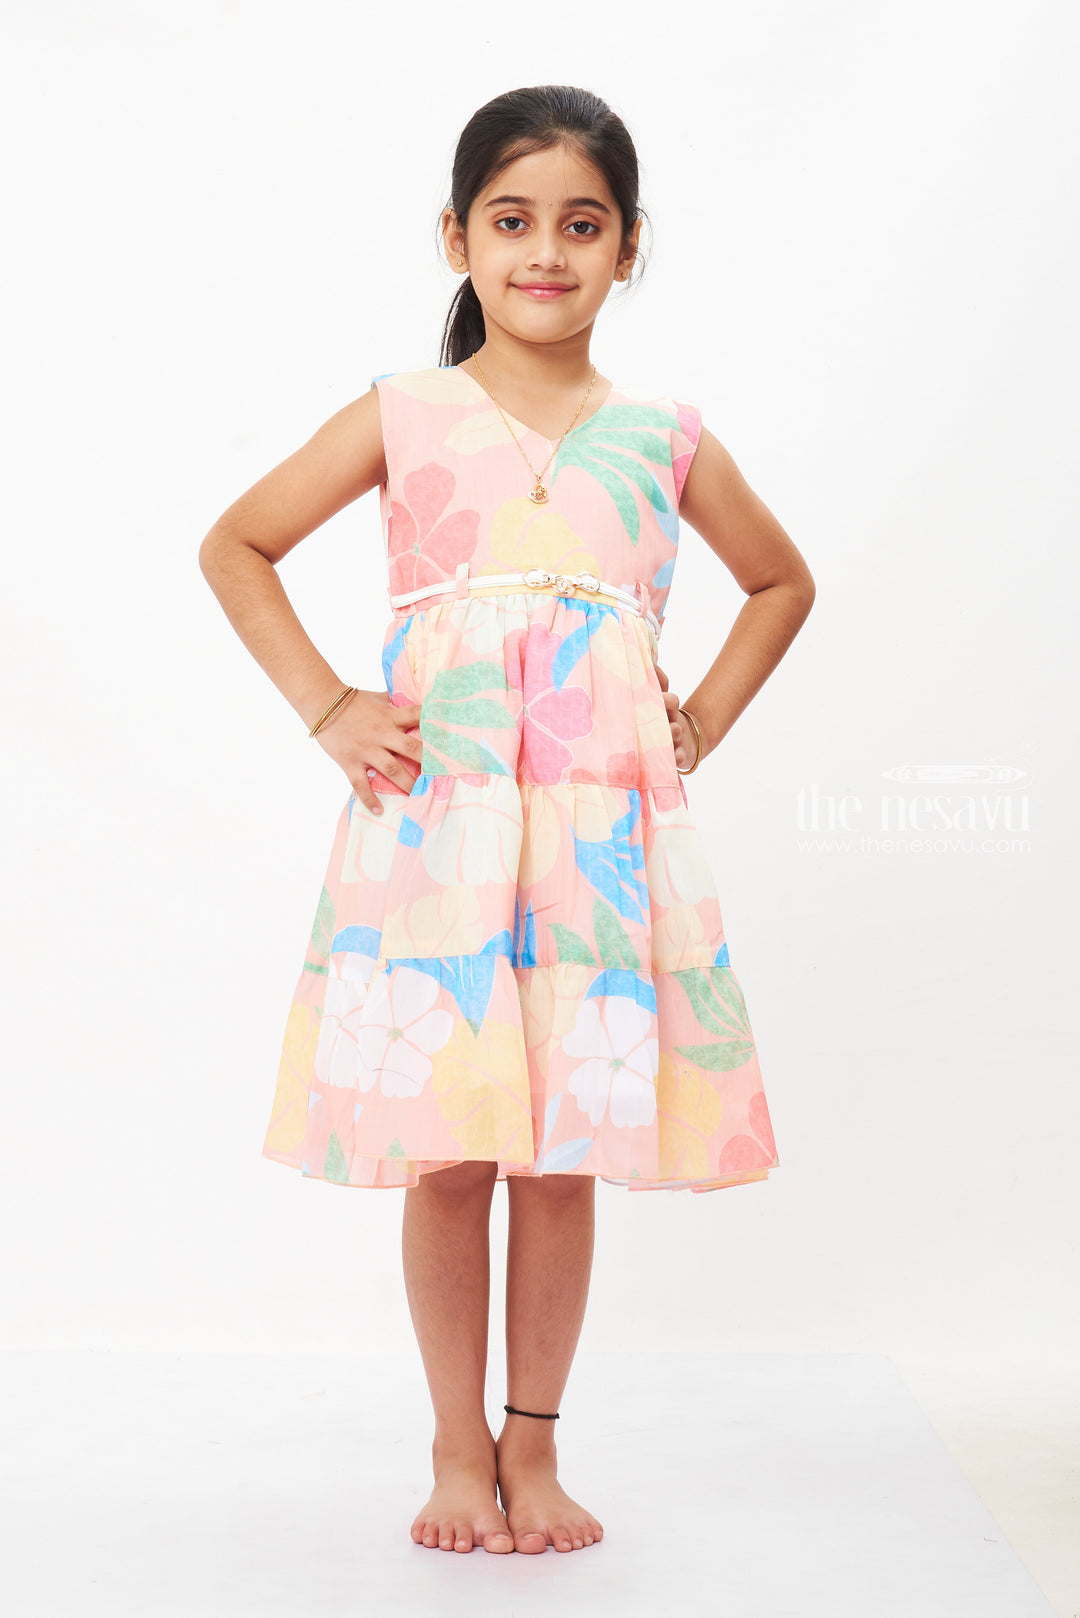 The Nesavu Girls Fancy Frock Pastel Watercolor Floral Girls Dress with Cinched Waist - Perfect for Sunny Days Nesavu 20 (3Y) / Salmon / Georgette GFC1283B-20 Pastel Floral Dresses for Girls | Light & Airy Summer Styles | The Nesavu